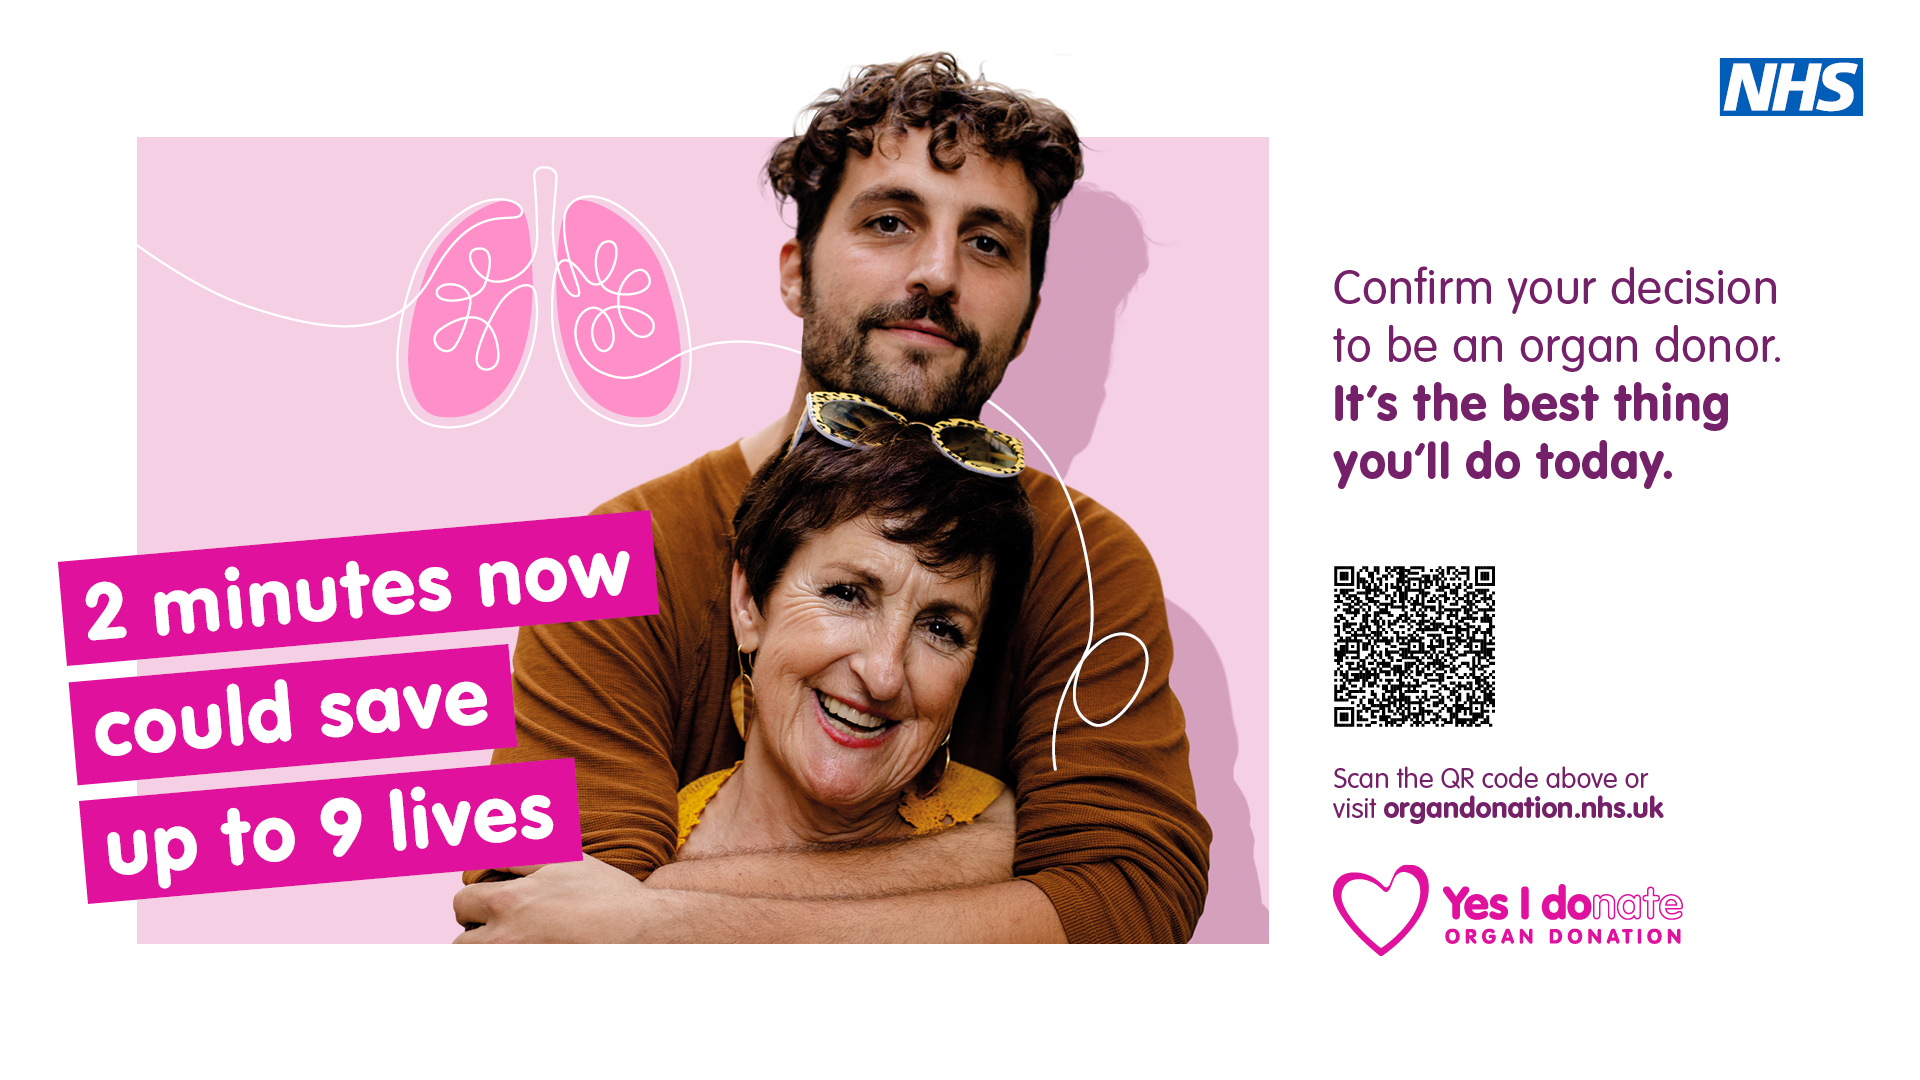 Two minutes could save up to nine lives if you confirm your decision on the organ donation register